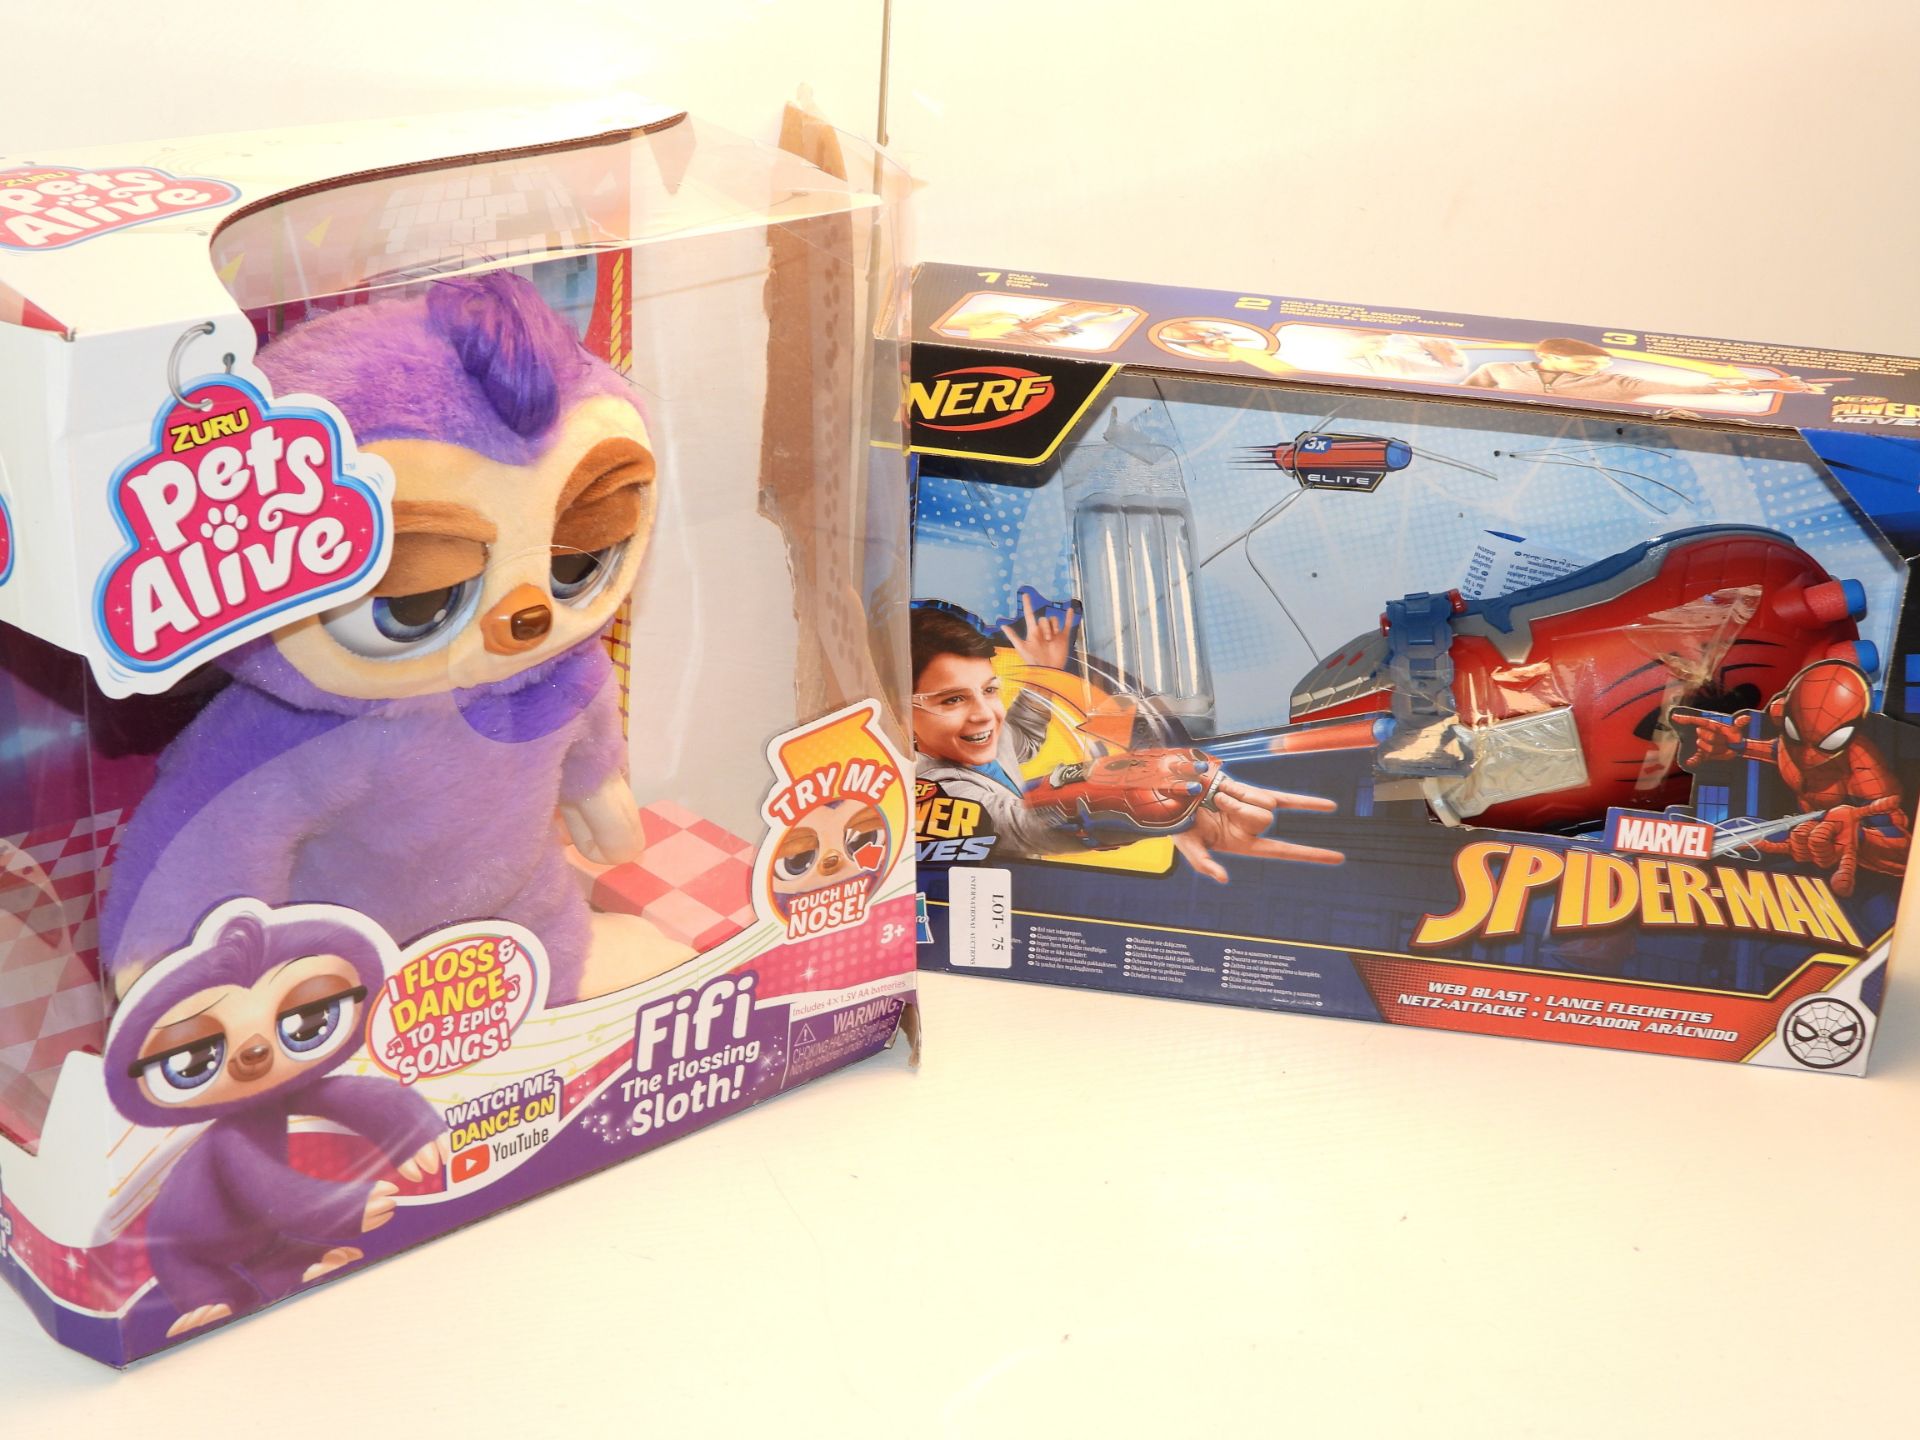 2X BOXED ASSORTED TOYS TO INCLUDE SPIDER-MAN NERF & ZURU PETS ALIVE FIFI THE FLOSSING SLOTHCondition